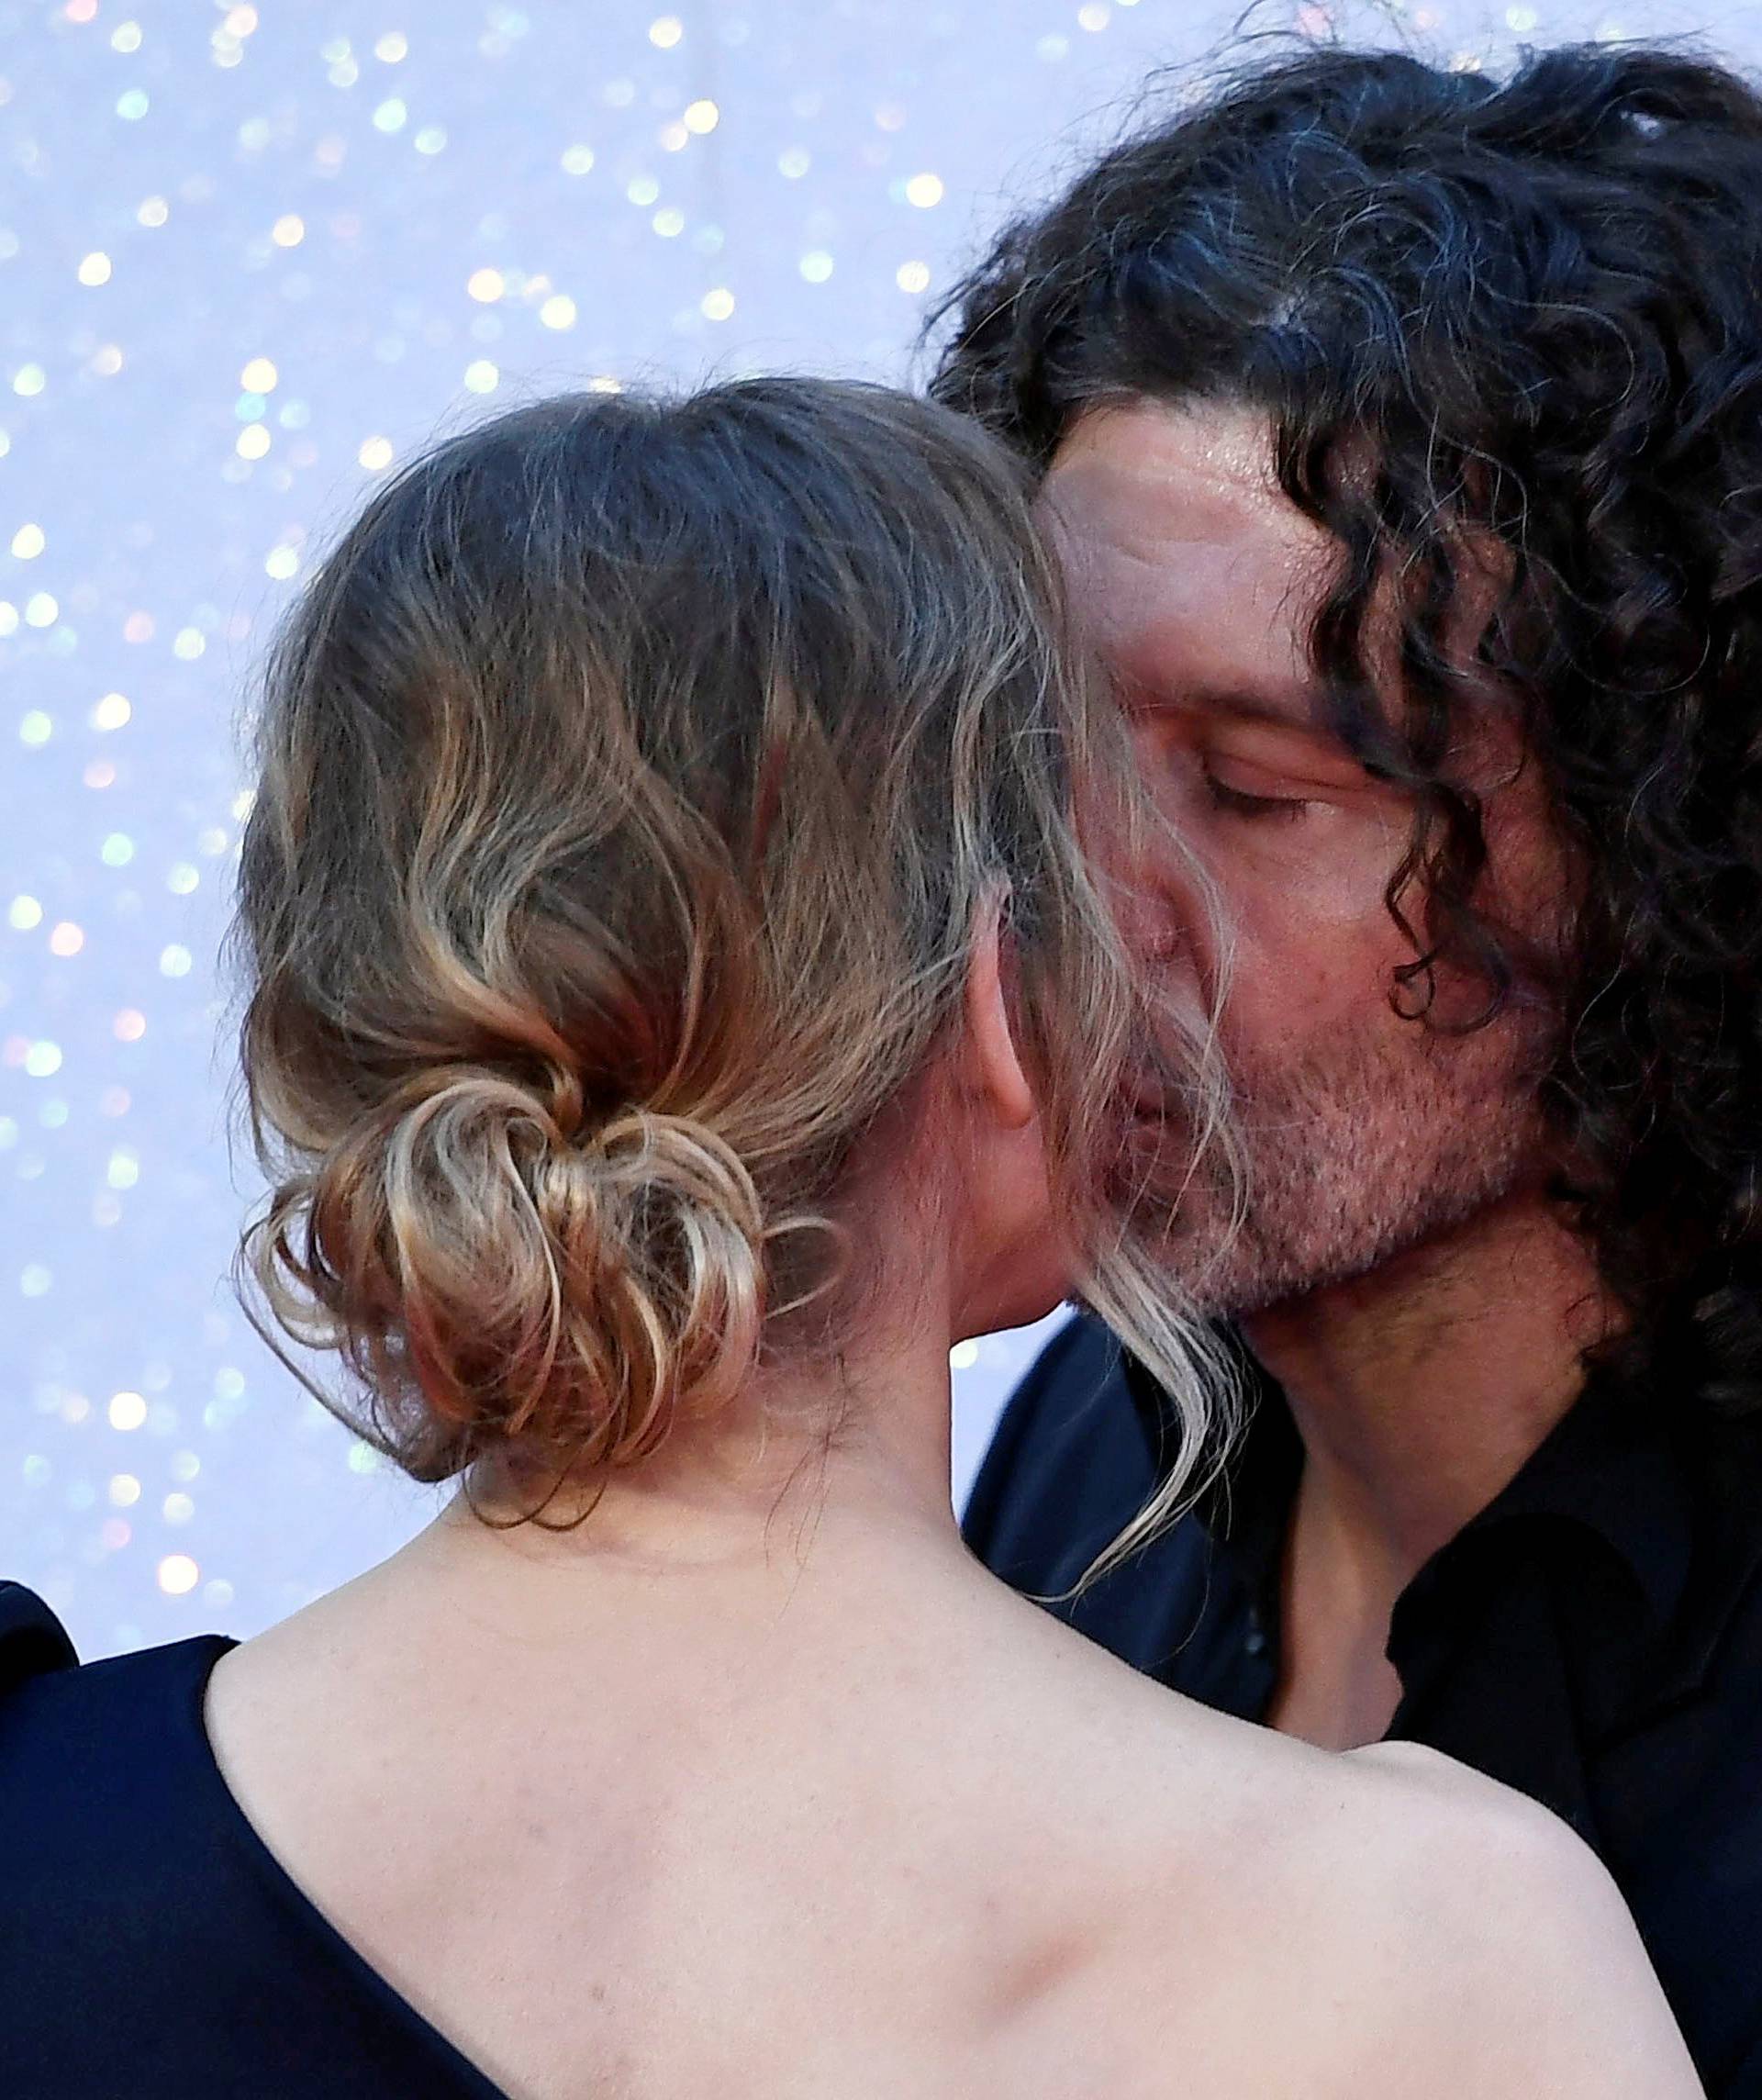 Renee Zellweger kisses an unknown man as she arrives for the world premiere of "Bridget Jones's Baby" at Leicester Square in London